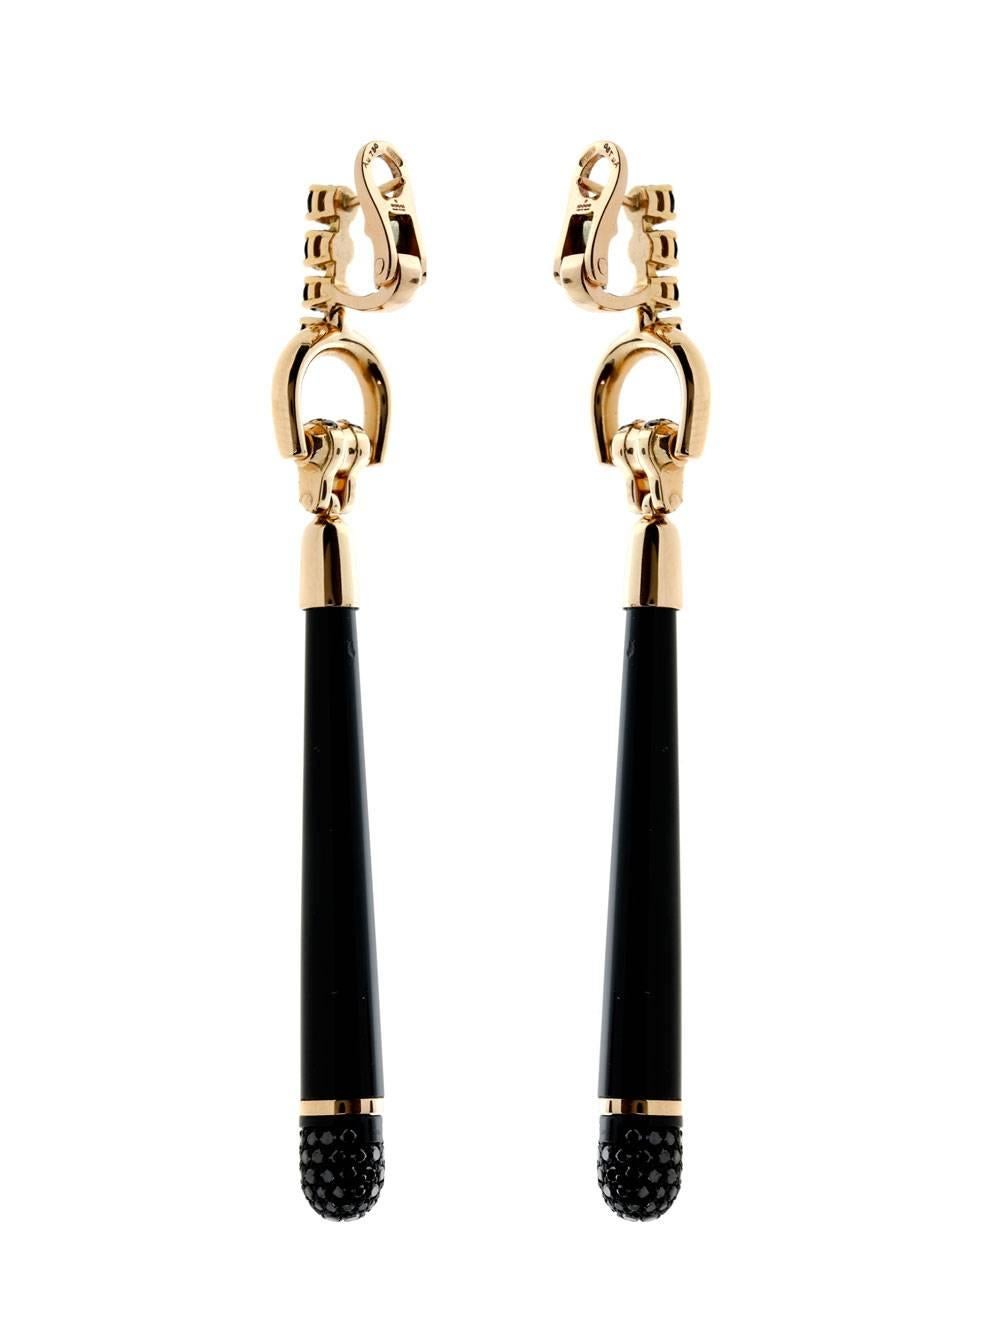 A fabulous pair of Gucci Horsebit drop earrings. Made from black synthetic corundum and 1.97ct of black diamonds set in 18k rose gold

Dimensions: 2.45″ in length

Inventory ID: 0000281